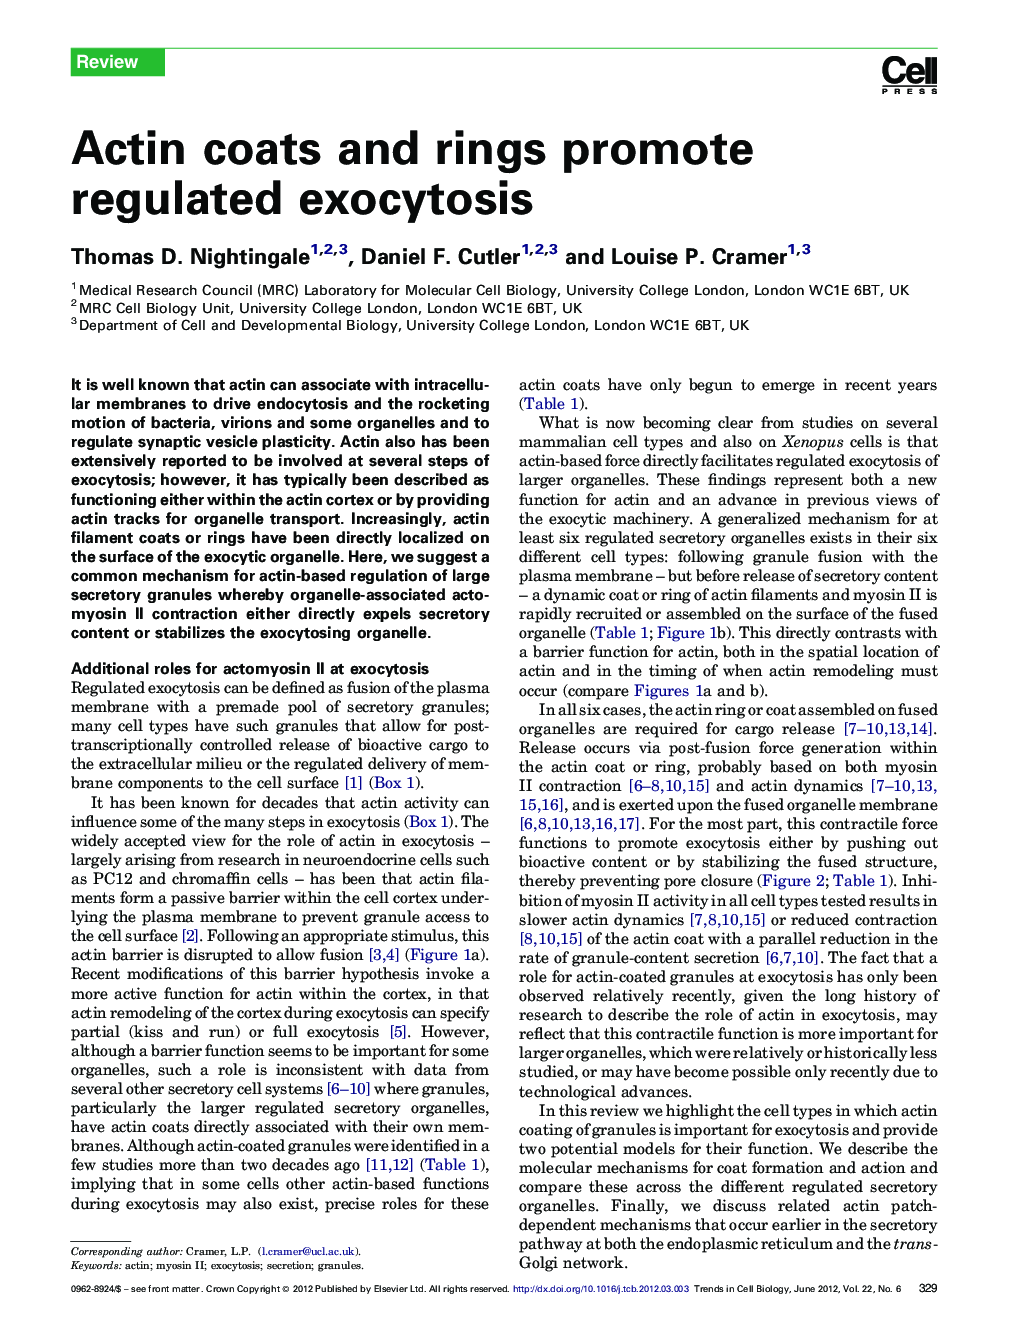 Actin coats and rings promote regulated exocytosis